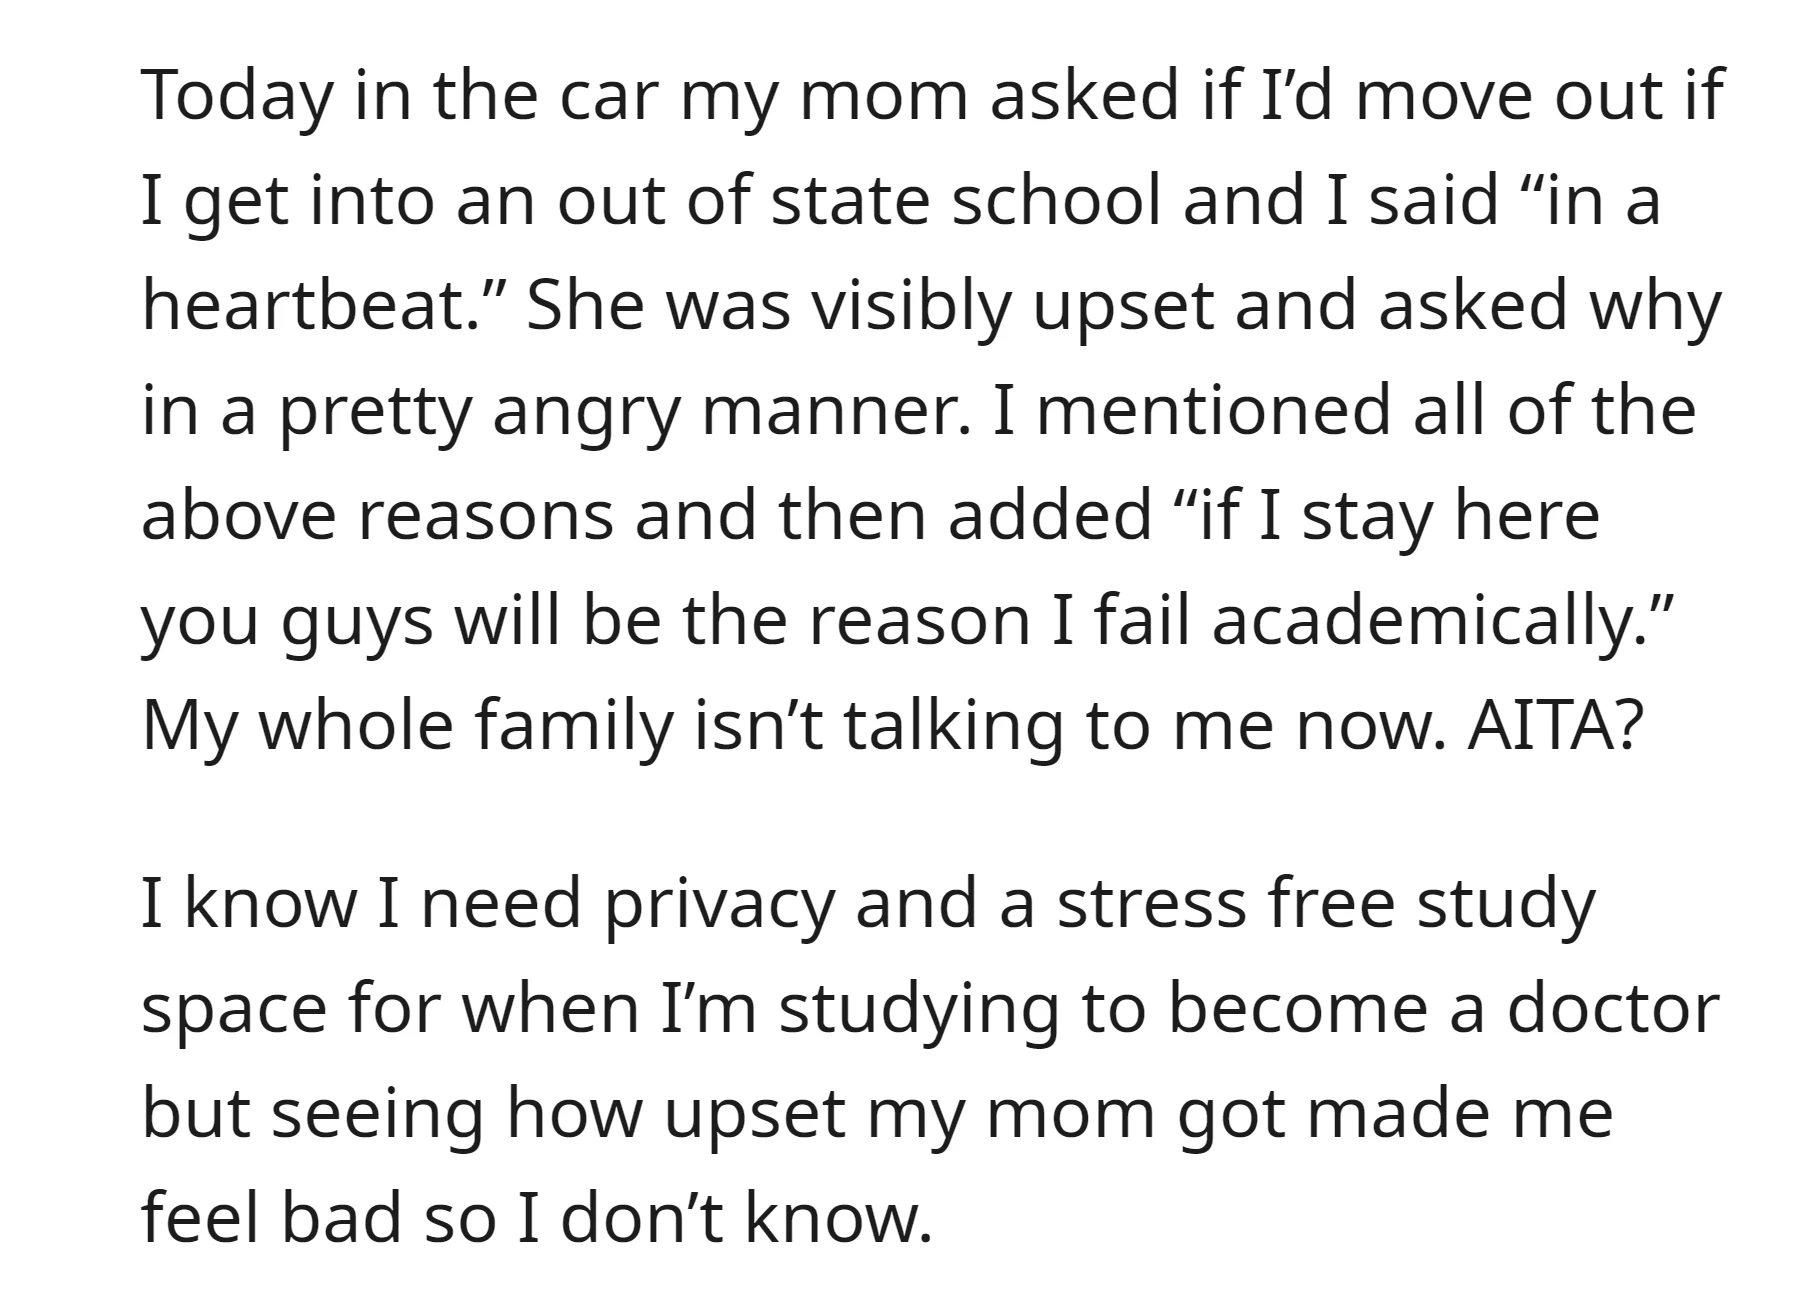 OP expressed the desire to move out for better academic focus, making their mom mad